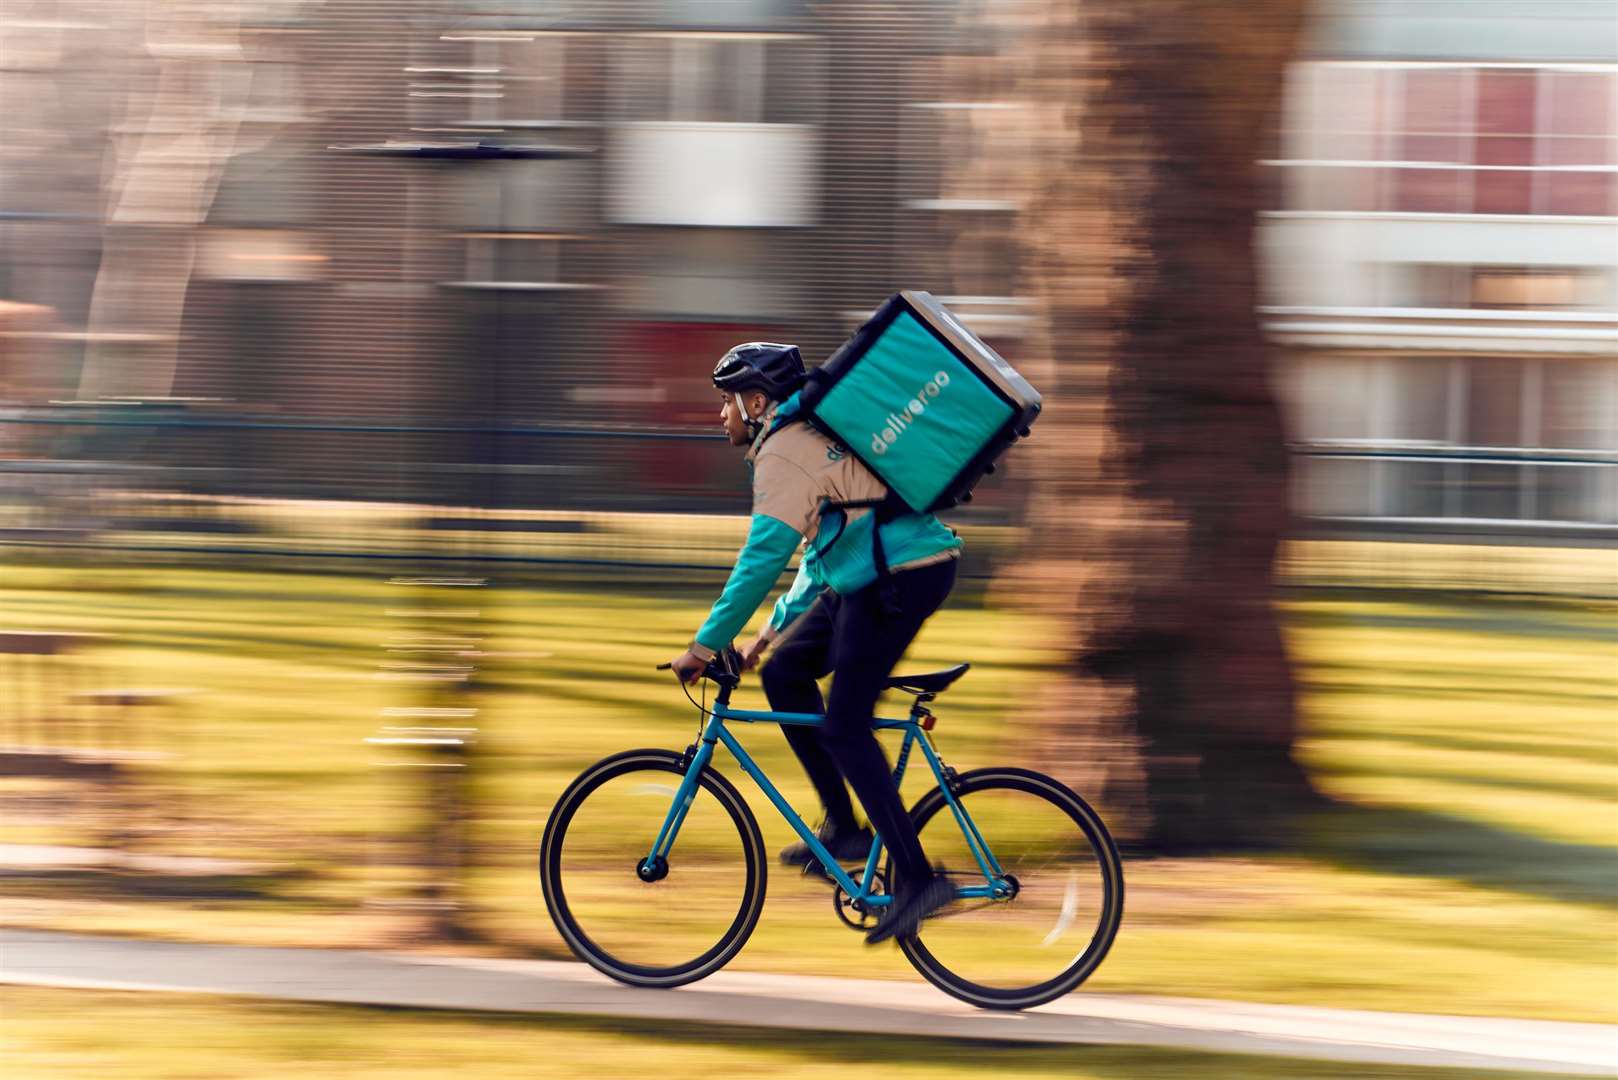 Deliveroo and Just East have established themselves in the market - but could they be facing some local opposition? Picture: Deliveroo